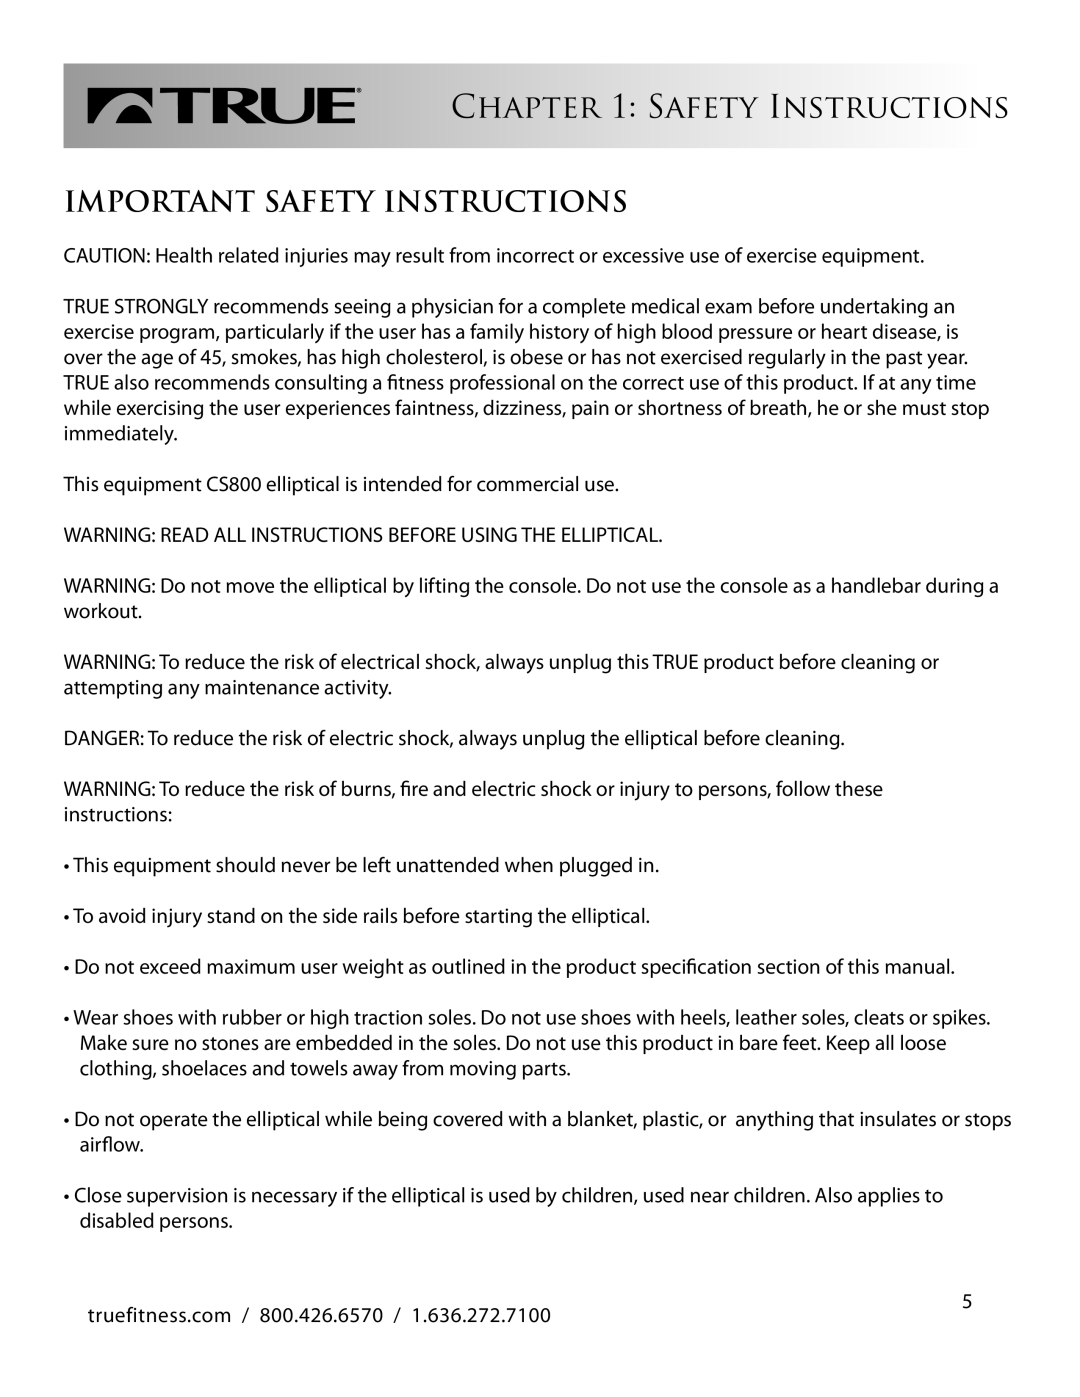 True Fitness CS800 manual Important Safety Instructions 